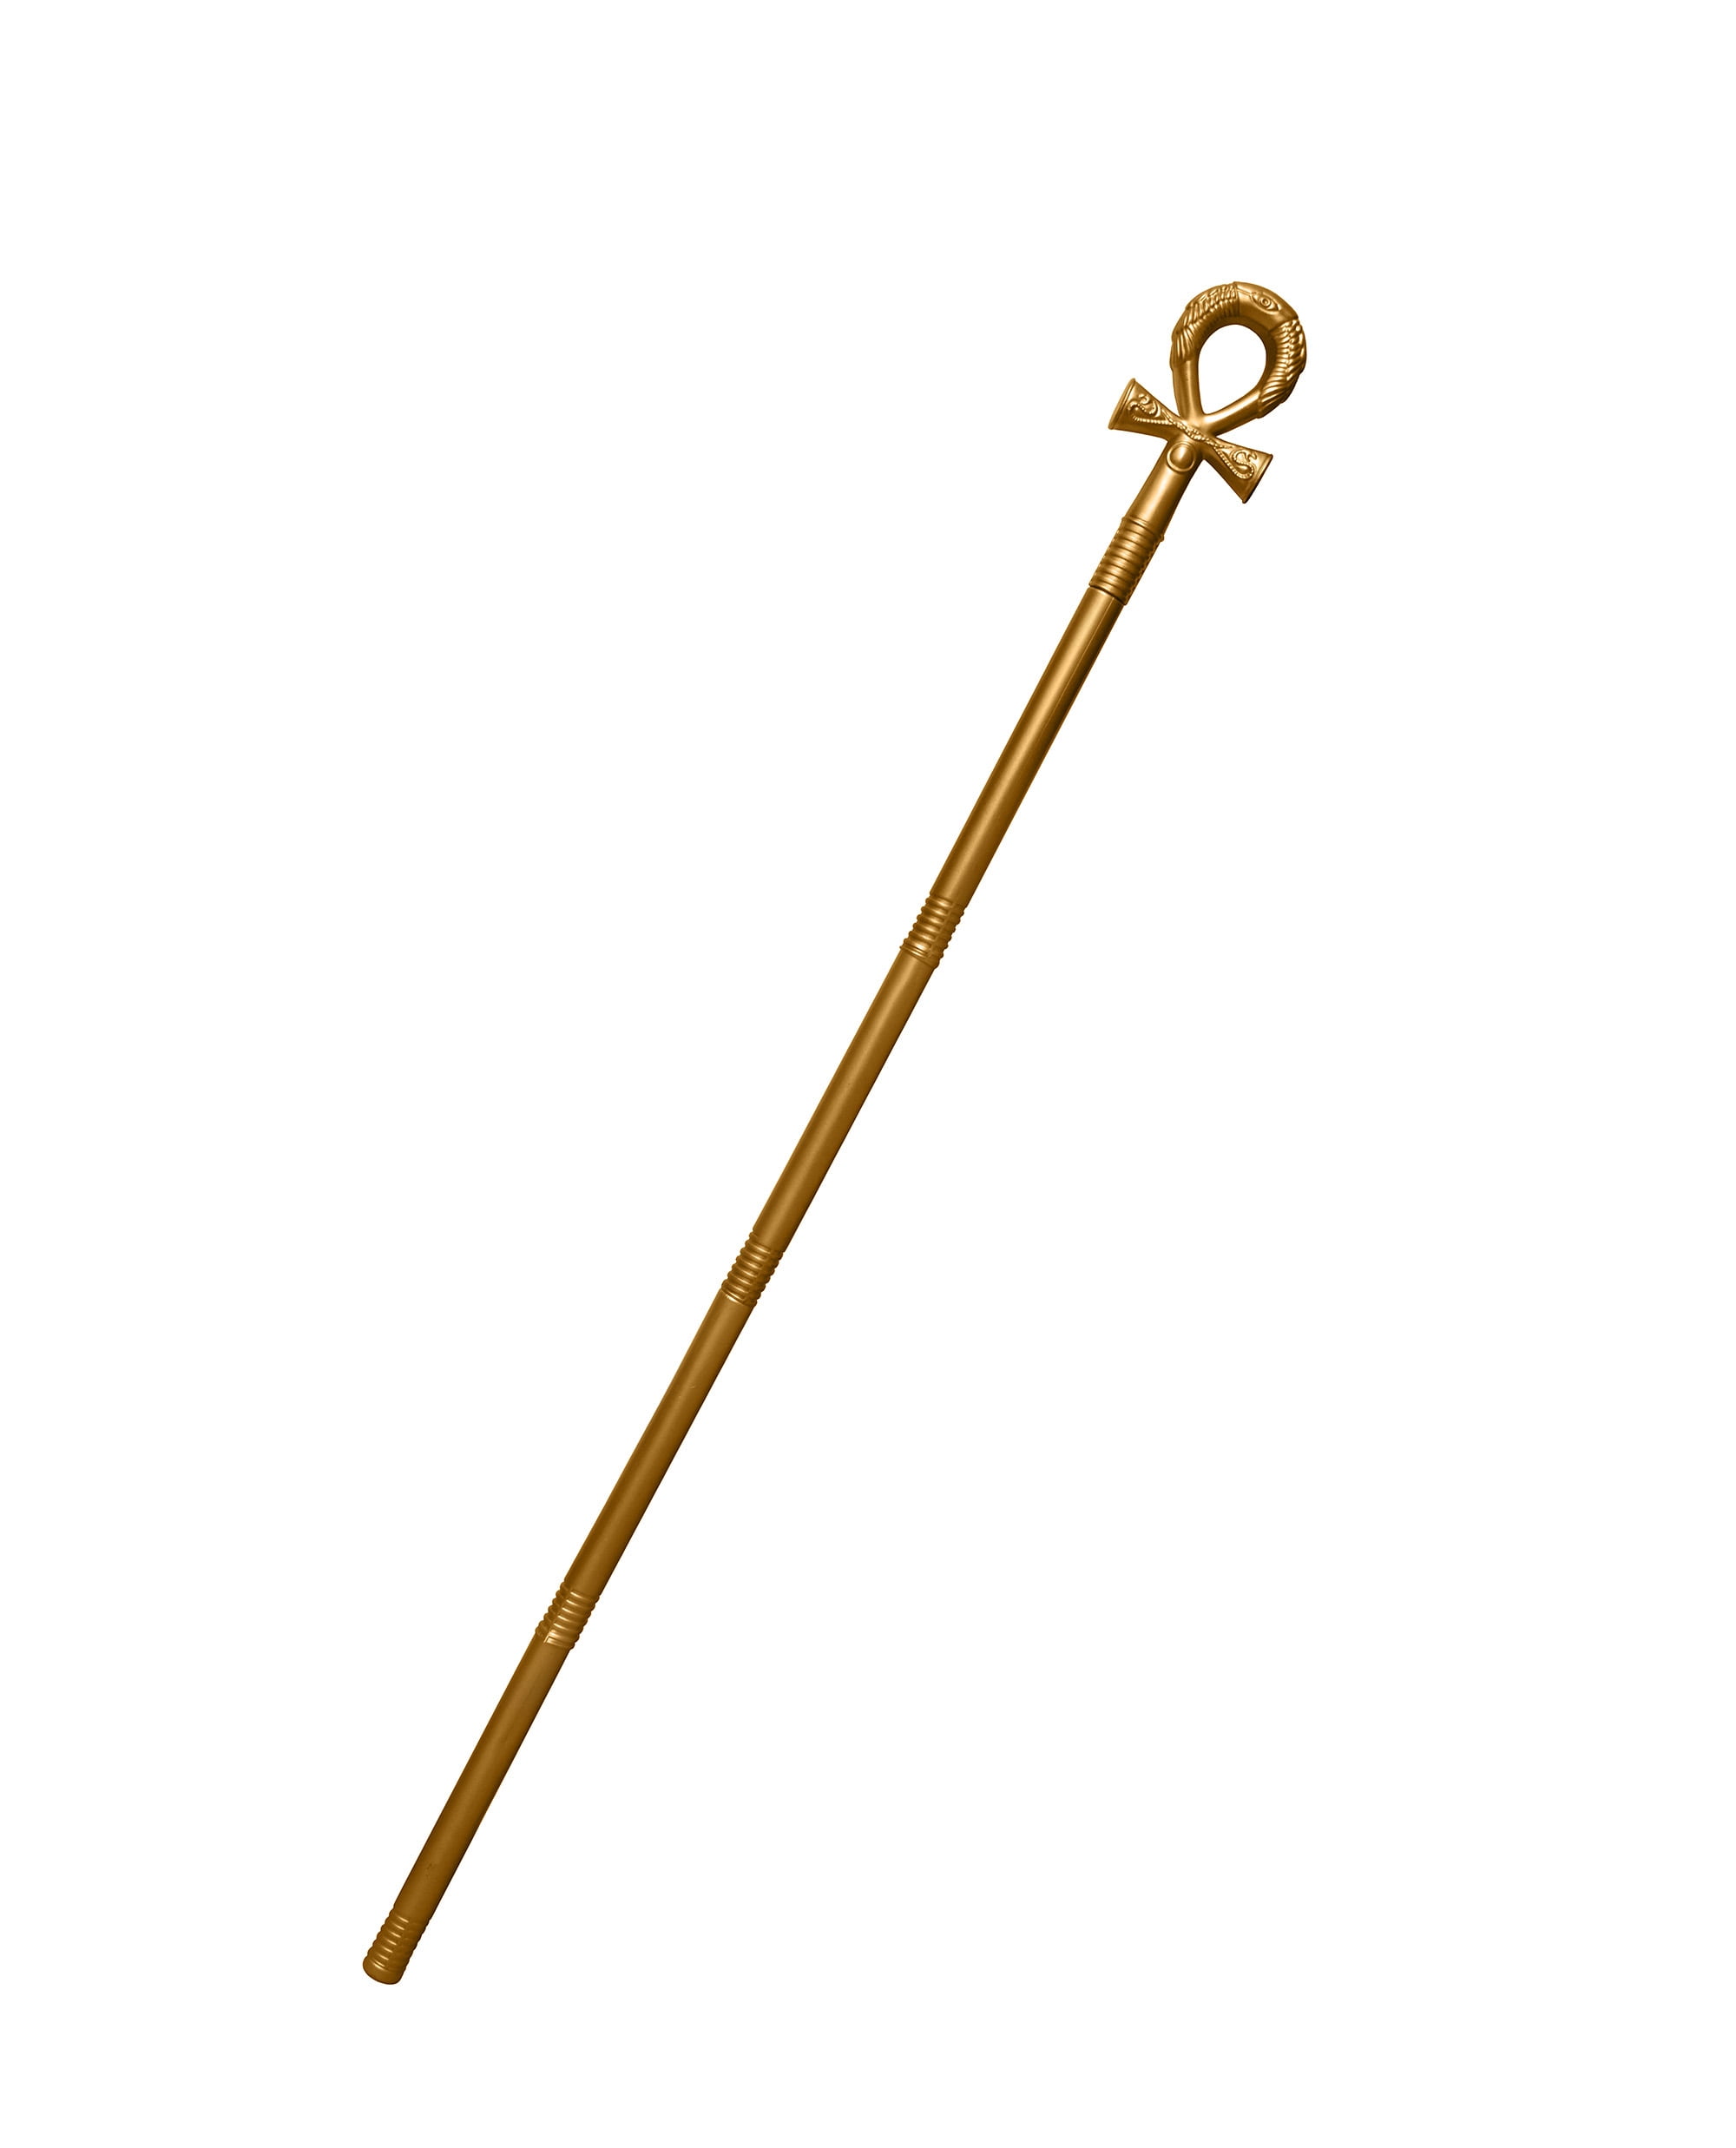 LUOZZY Attractive Three-Section Round Head Scepter Round Top Staff Stick Halloween Props Cane Colsplay Costume Prop Golden Round Head Style 